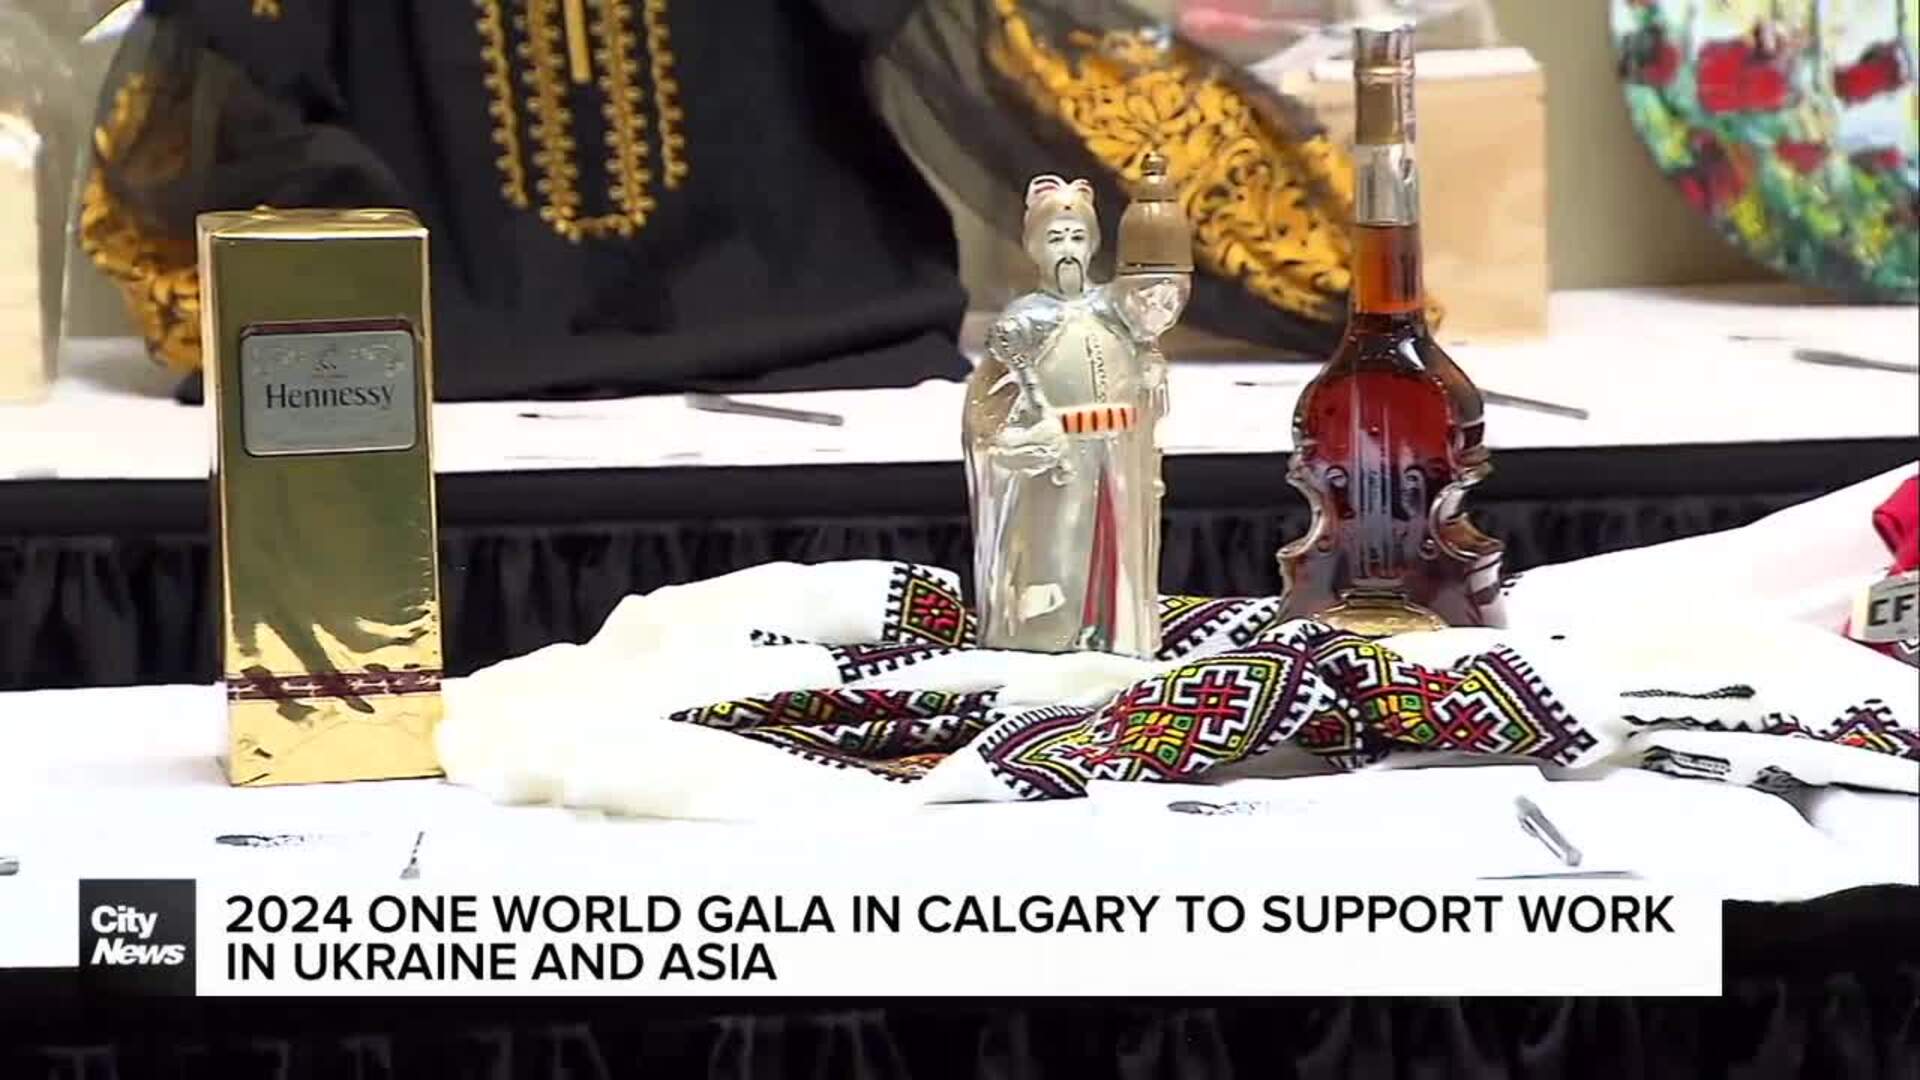 2024 One World Gala in Calgary to support work in Ukraine and Asia